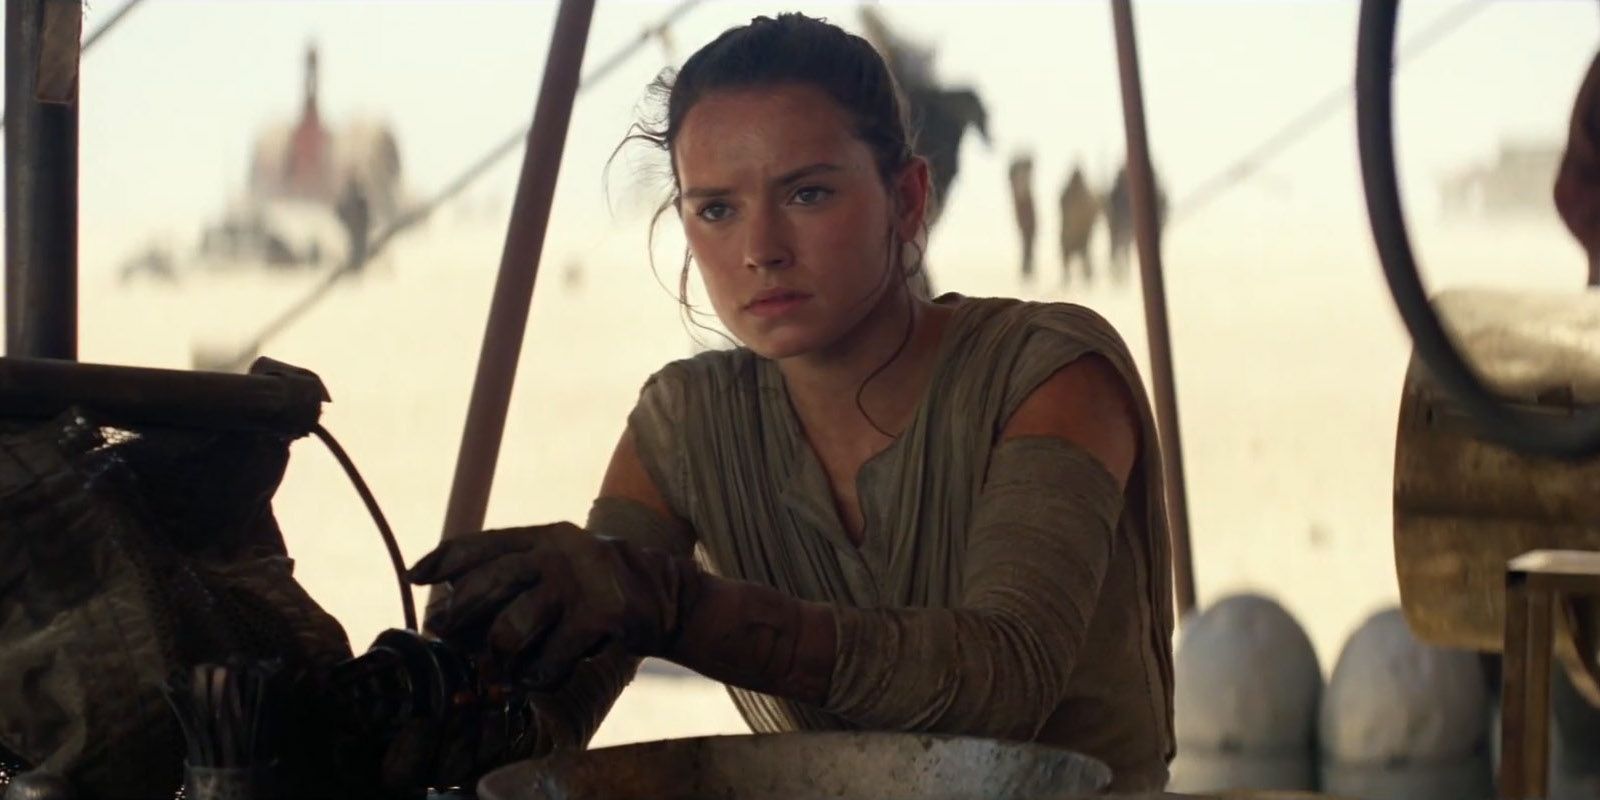 Daisy Ridley as Rey in Star Wars The Force Awakens.